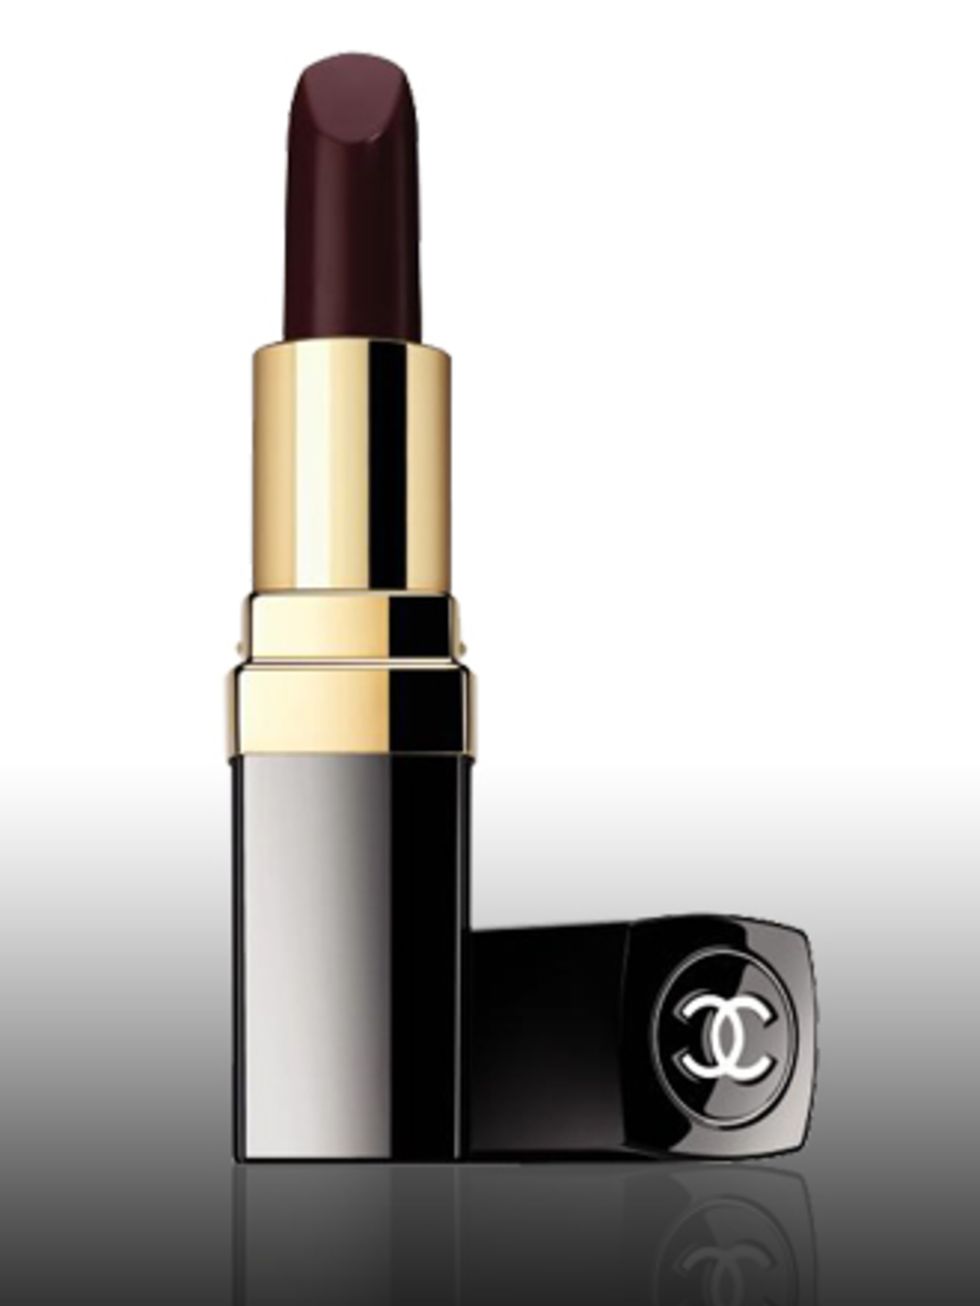 <p>Rouge Hydrabase in Fantastic Plum, £17.50 by <a href="http://www.chanel.com/fb/um.php?lo=gb&amp;la=en-gb&amp;re=chanelcom%20">Chanel</a>. For stockists call 020 7493 3836.</p><p>Dark, vampy, almost blood stained lips will be a signature look for winter